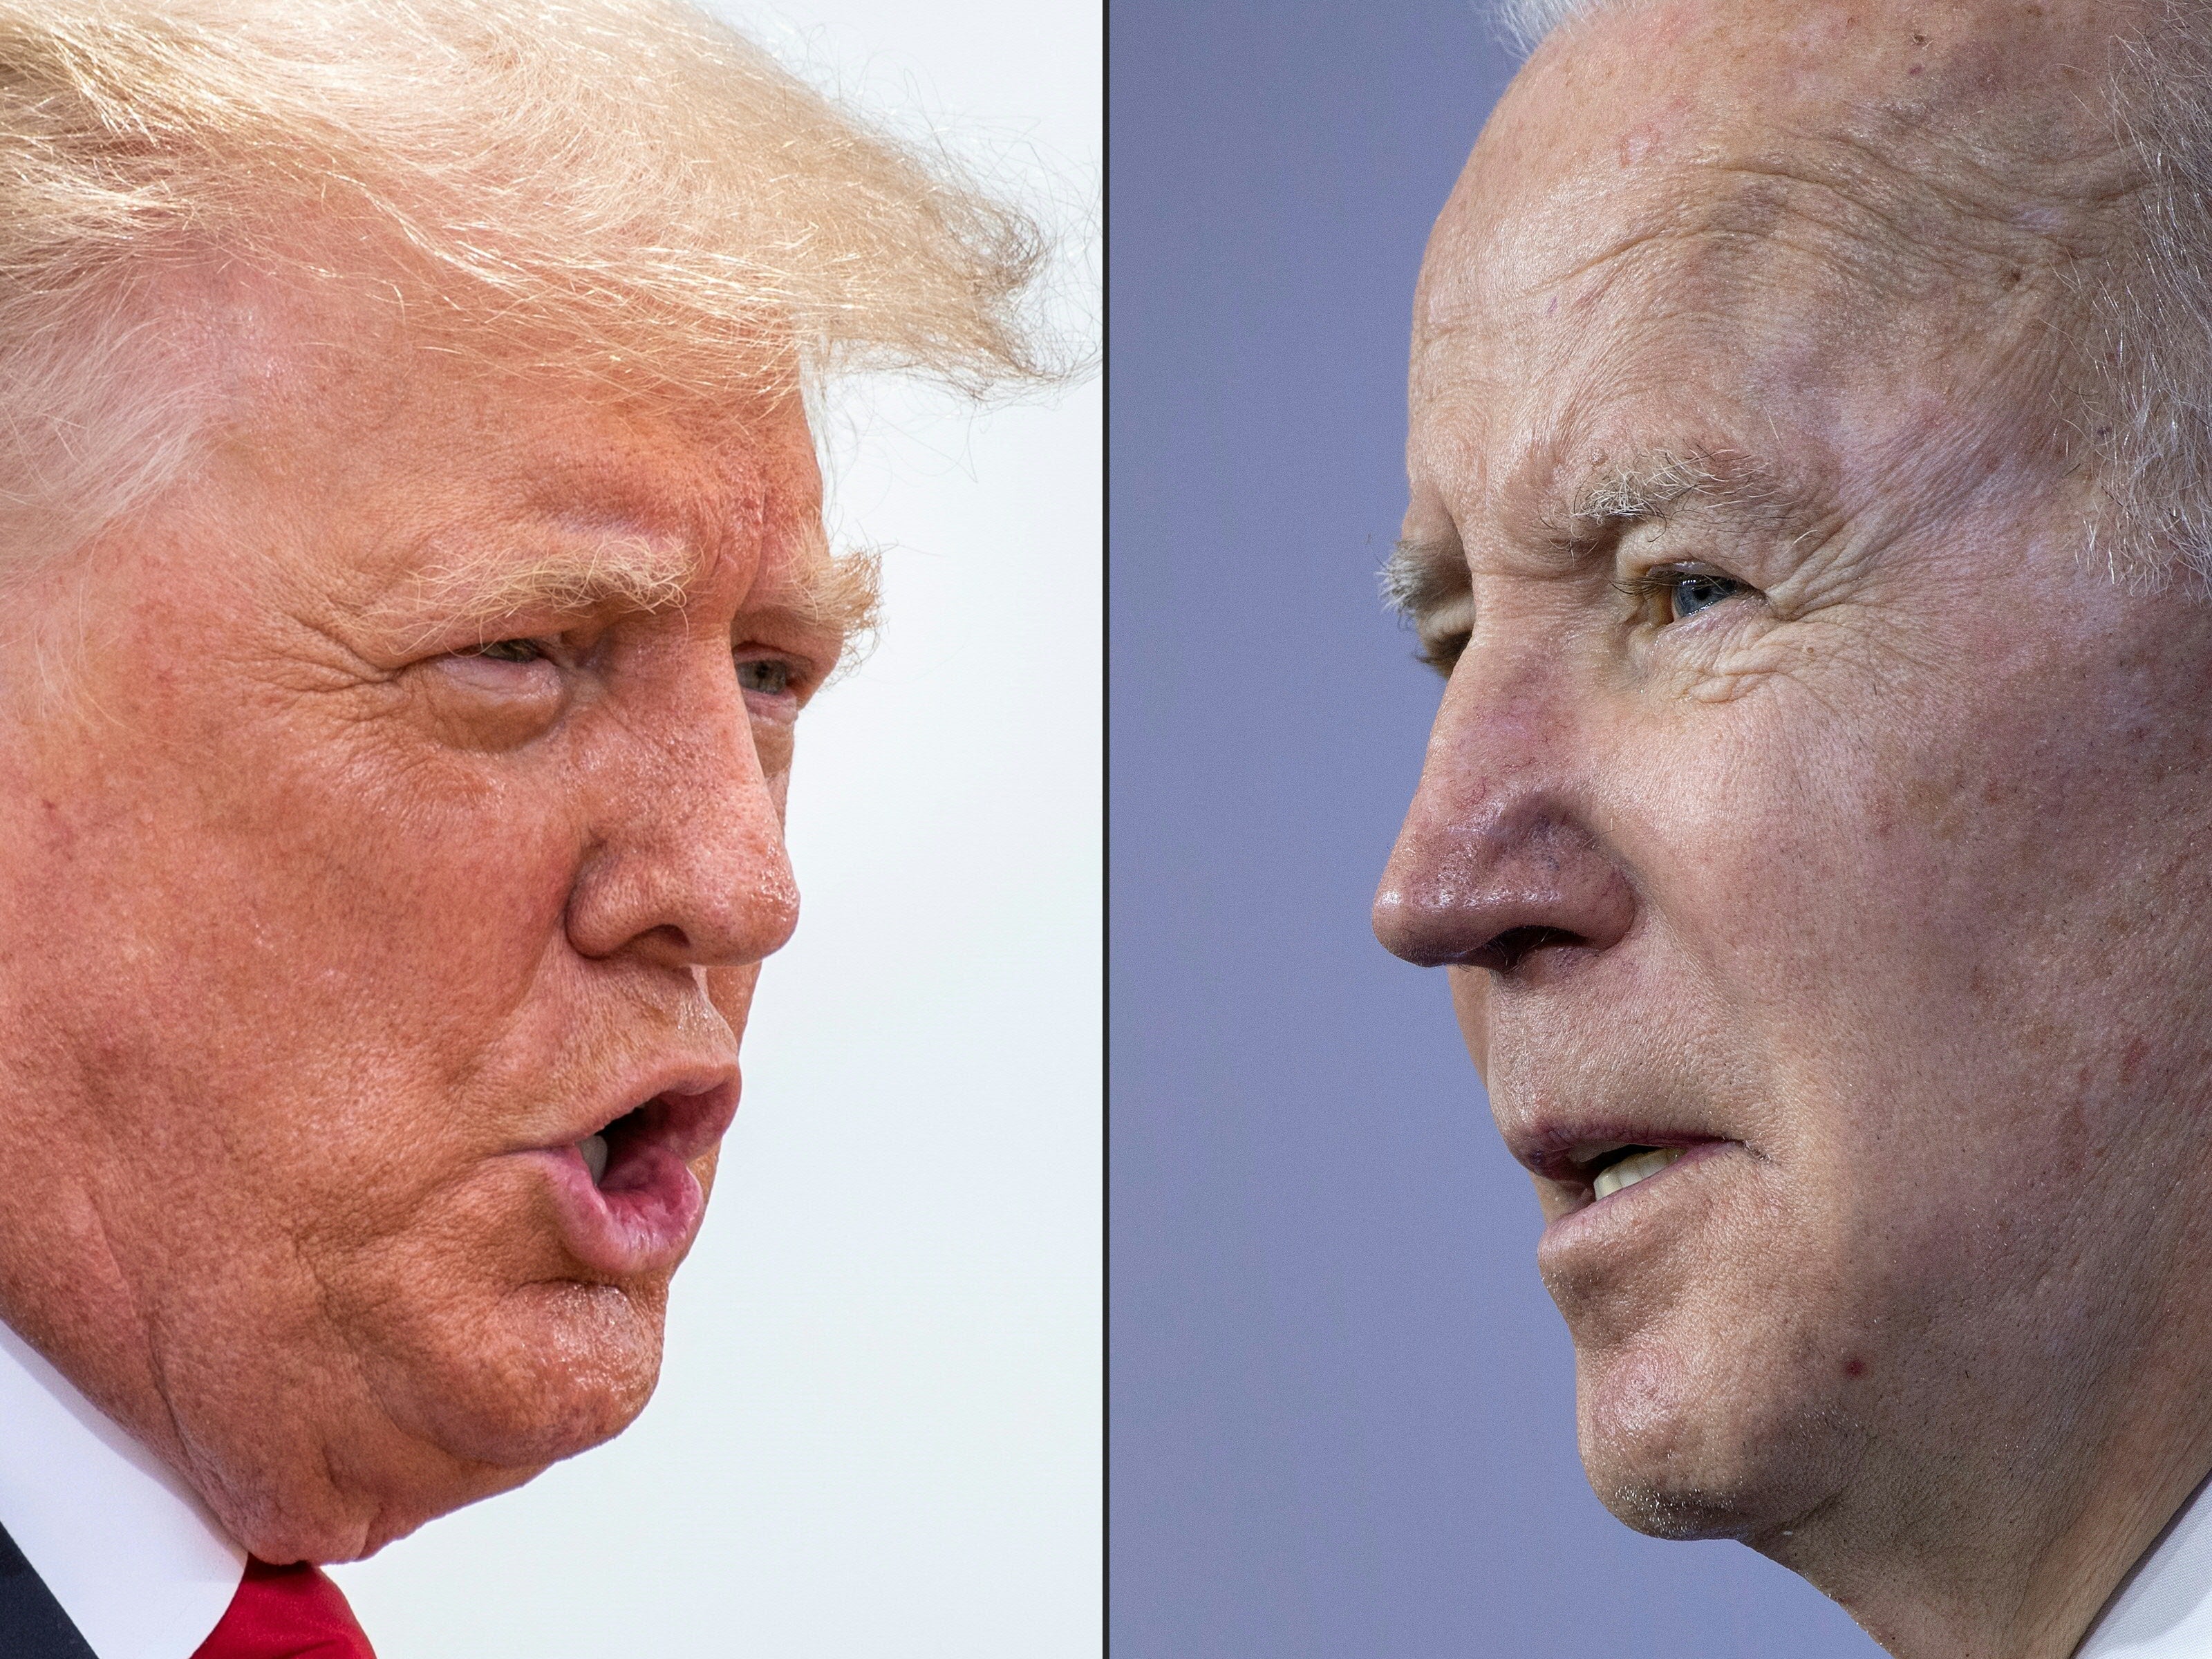 CNN will host the first 2024 presidential debate between Donald Trump and Joe Biden on June 27. It’s now been revealed that Trump will get the final comment.